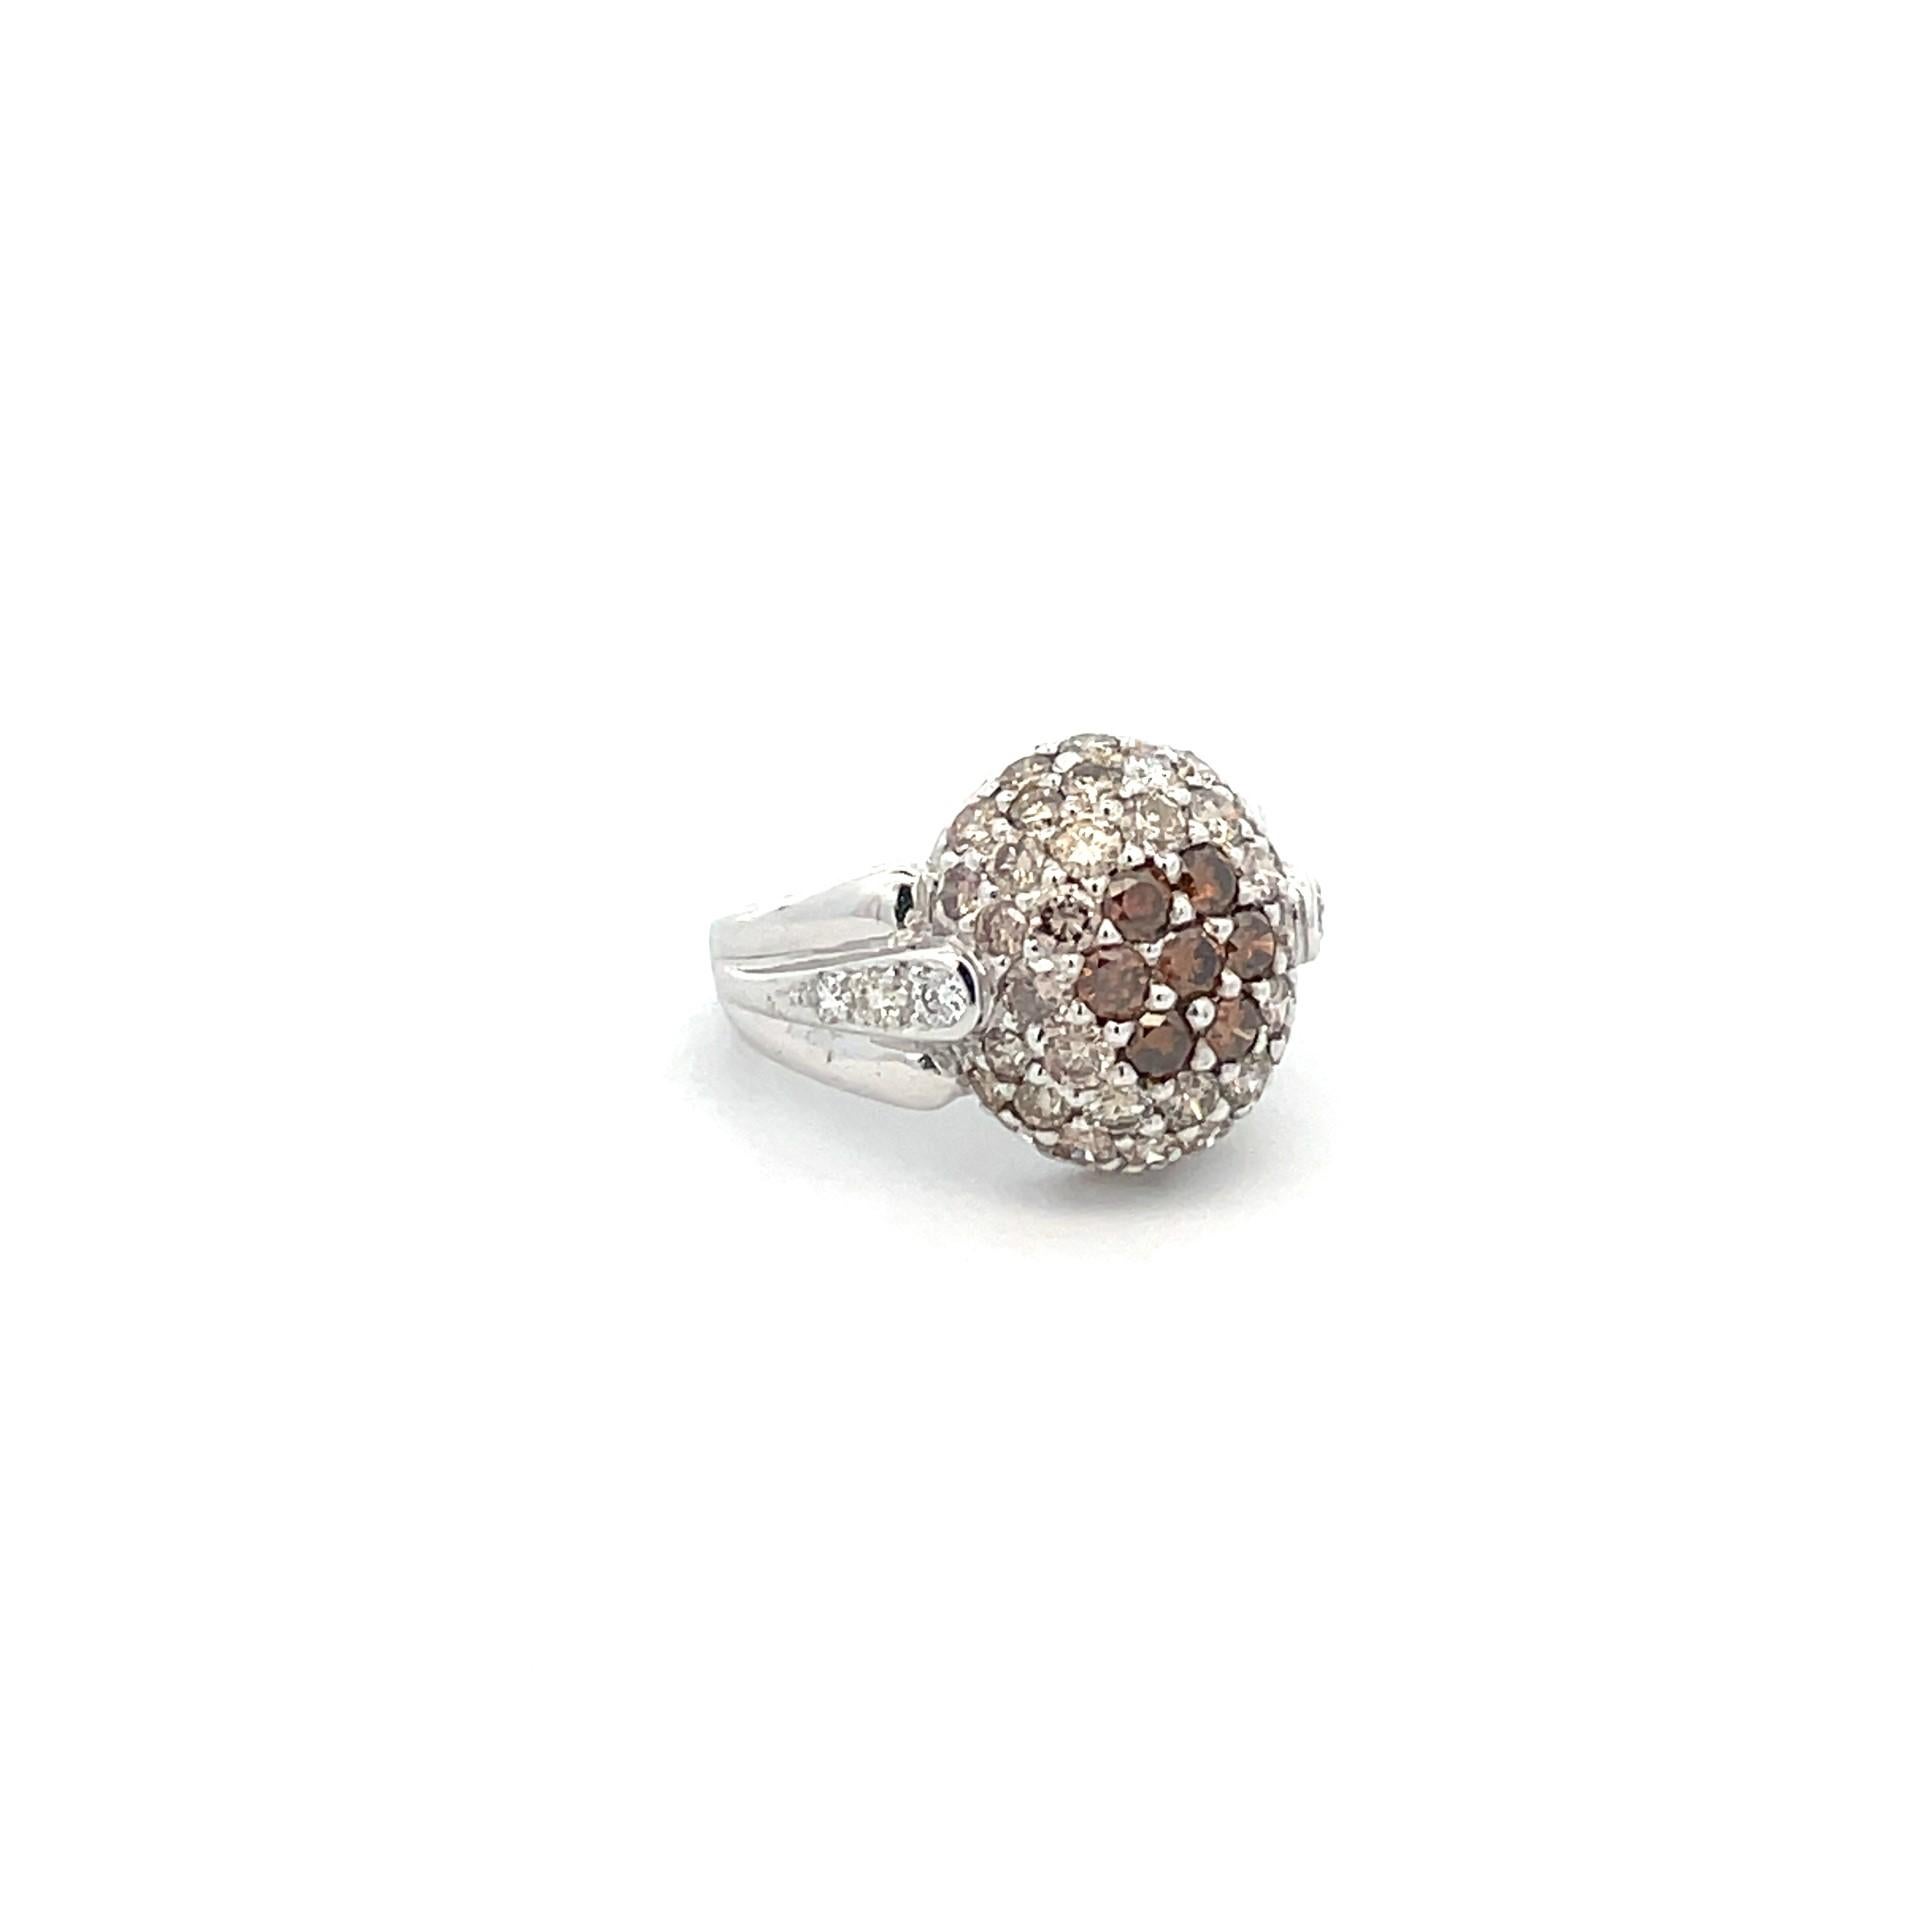 Gorgeous Strawberry ring with natural brown and white diamond in 18 karat white gold.

49 natural brown diamonds 1.50ct total weight

6 brilliant cut natural diamonds 0.36ct total weight

18kt white gold weighing 7.50 grams

Stamped SPD & 750